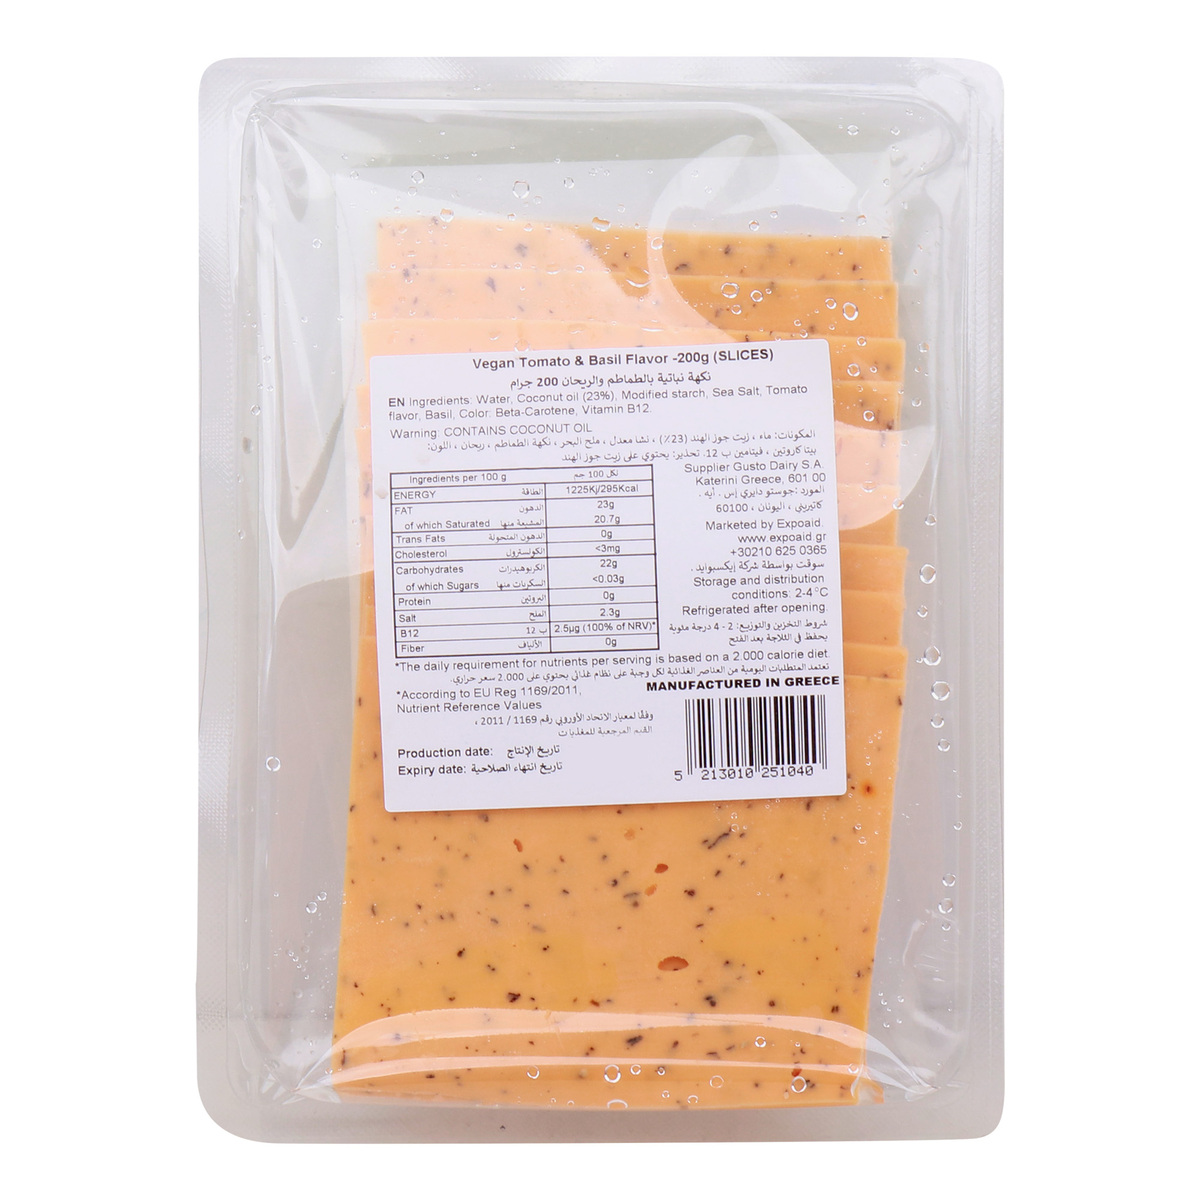 D'Vegan Tomato and Basil Flavor Cheese in Slices, 200 g